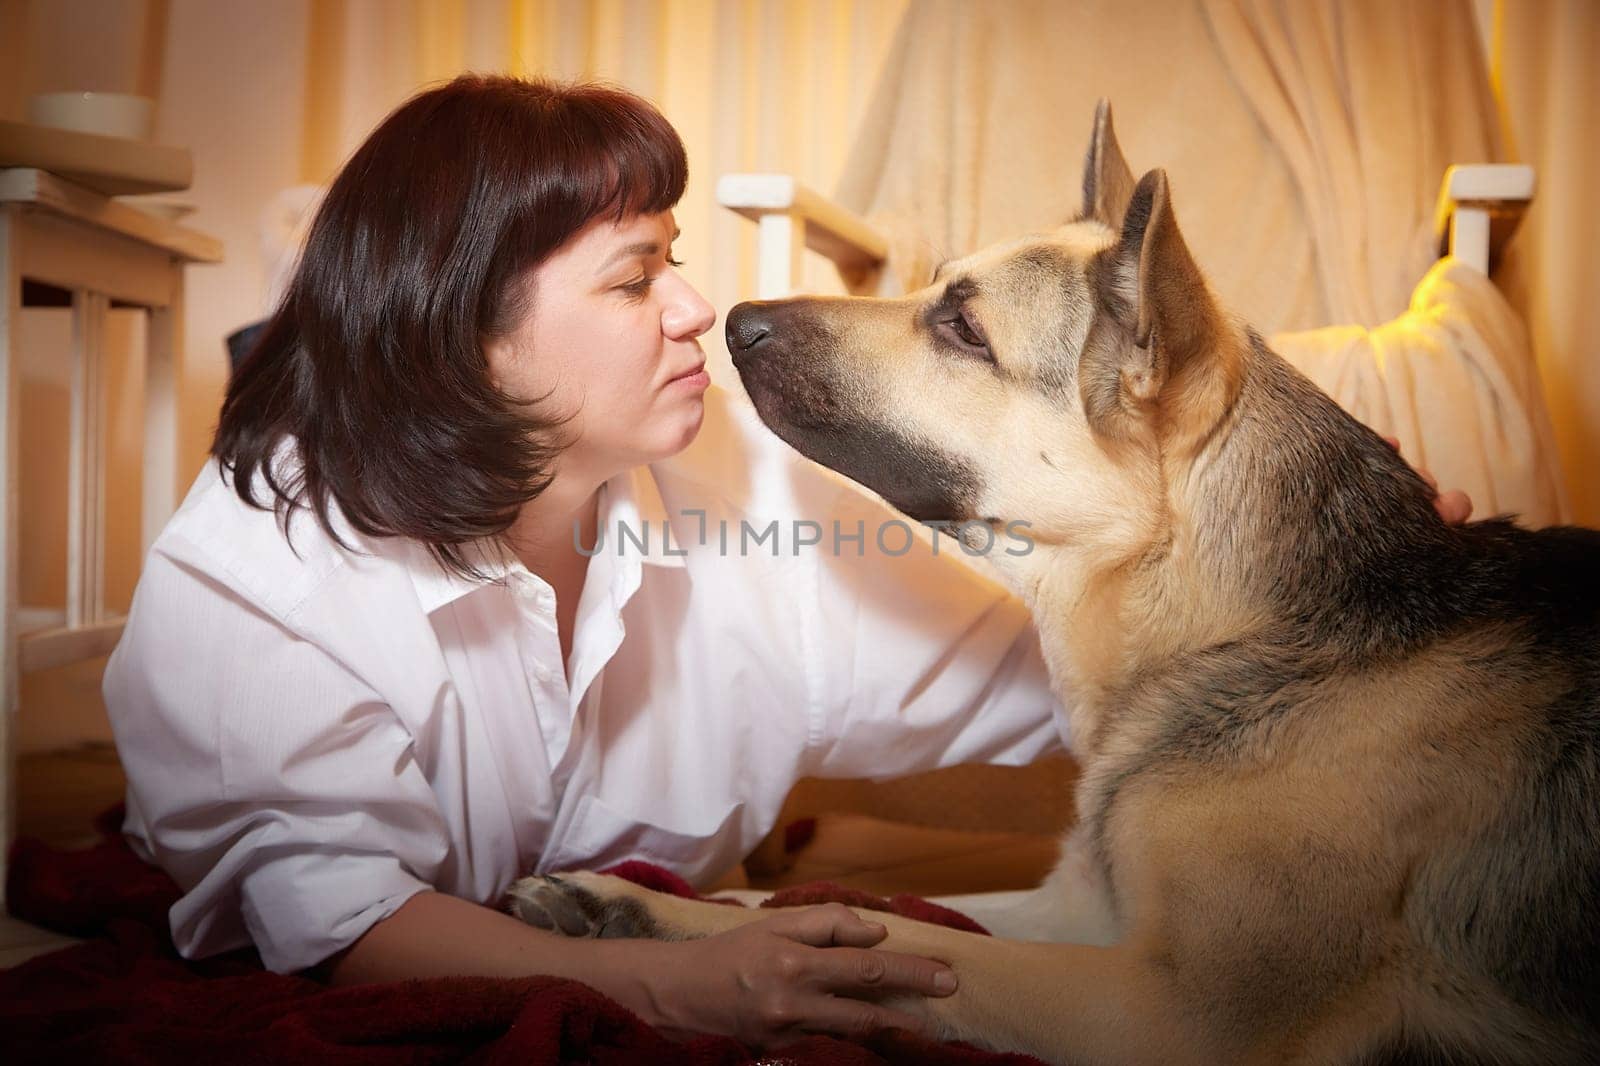 Adult mature woman with big shepherd dog in white shirt. Room with girl and calm cozy evening atmosphere with transparent curtains and soft warm light of lamps. Concept of love for animals, pets